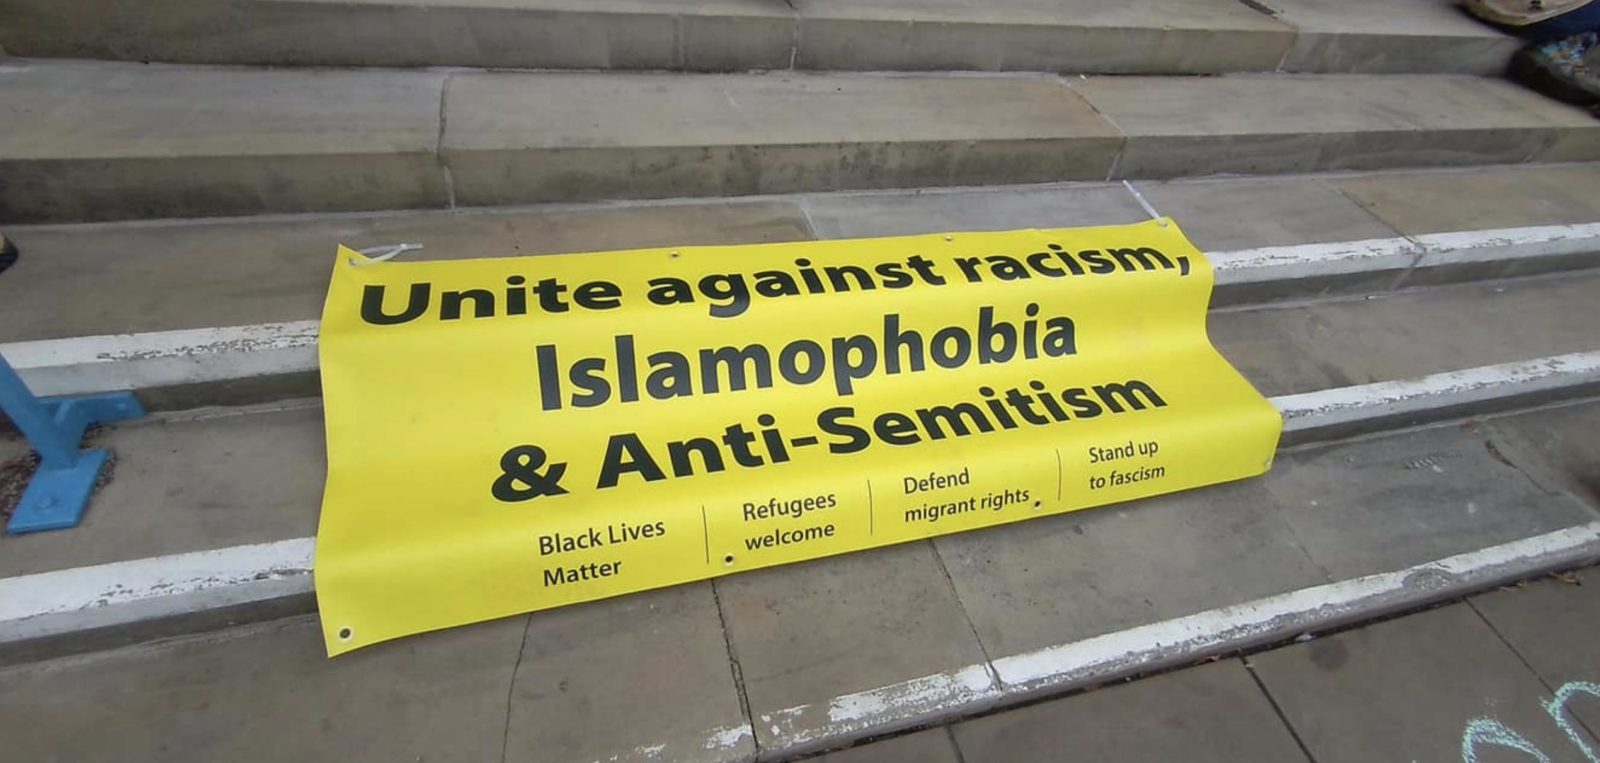 Image of a banner on steps which reads "Unite against racism, Islamophobia & Anti-Semitism